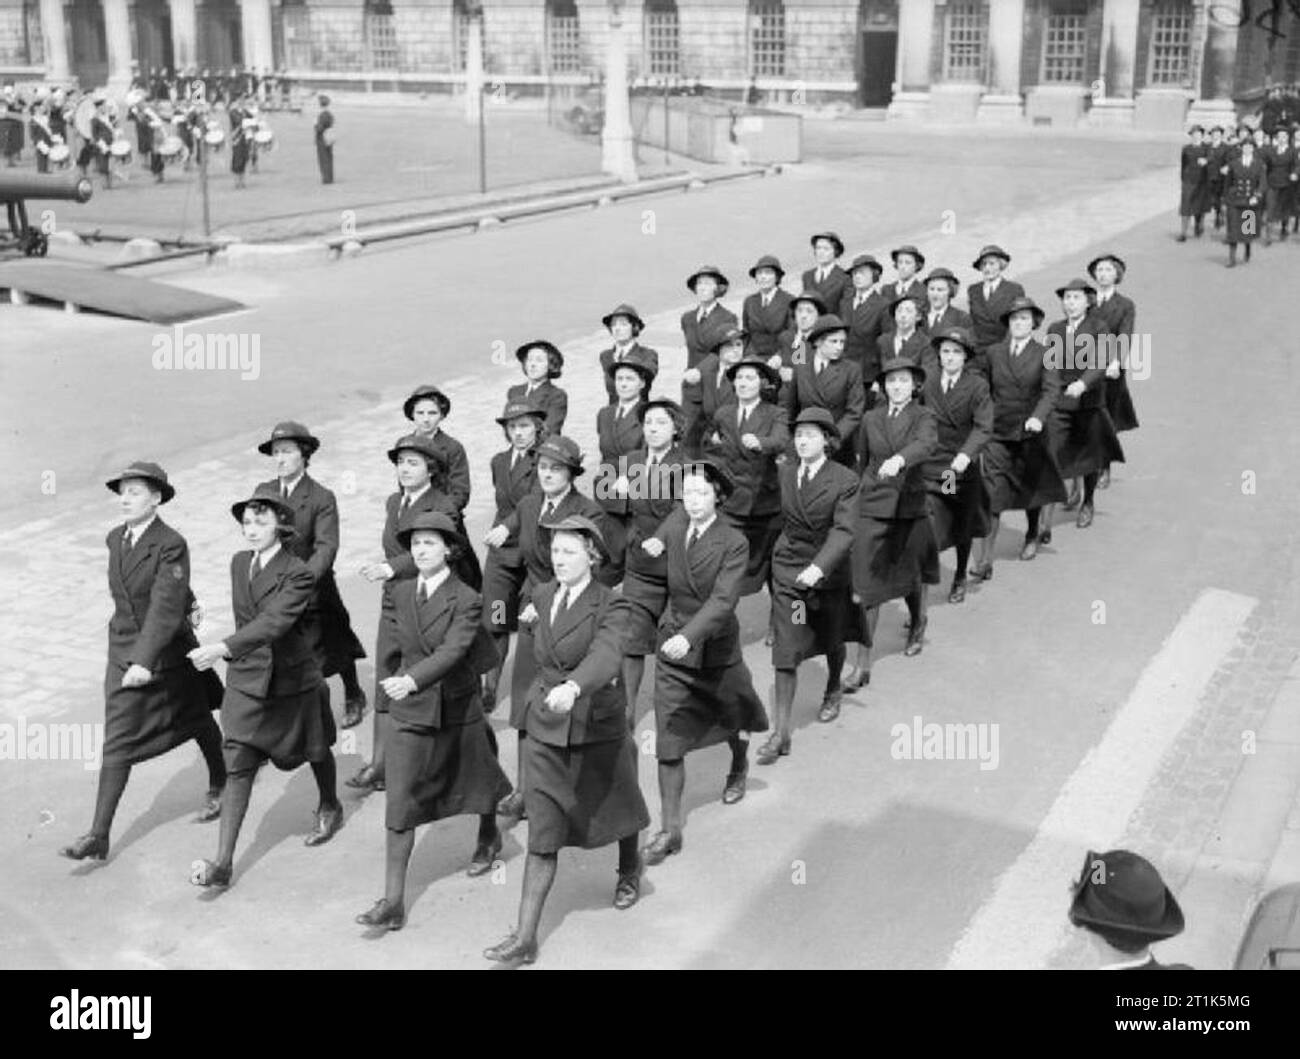 Hrh the Duchess of Kent Visits Greenwich To Inspect Wrens, 1941. The March Past by WRNS. Stock Photo